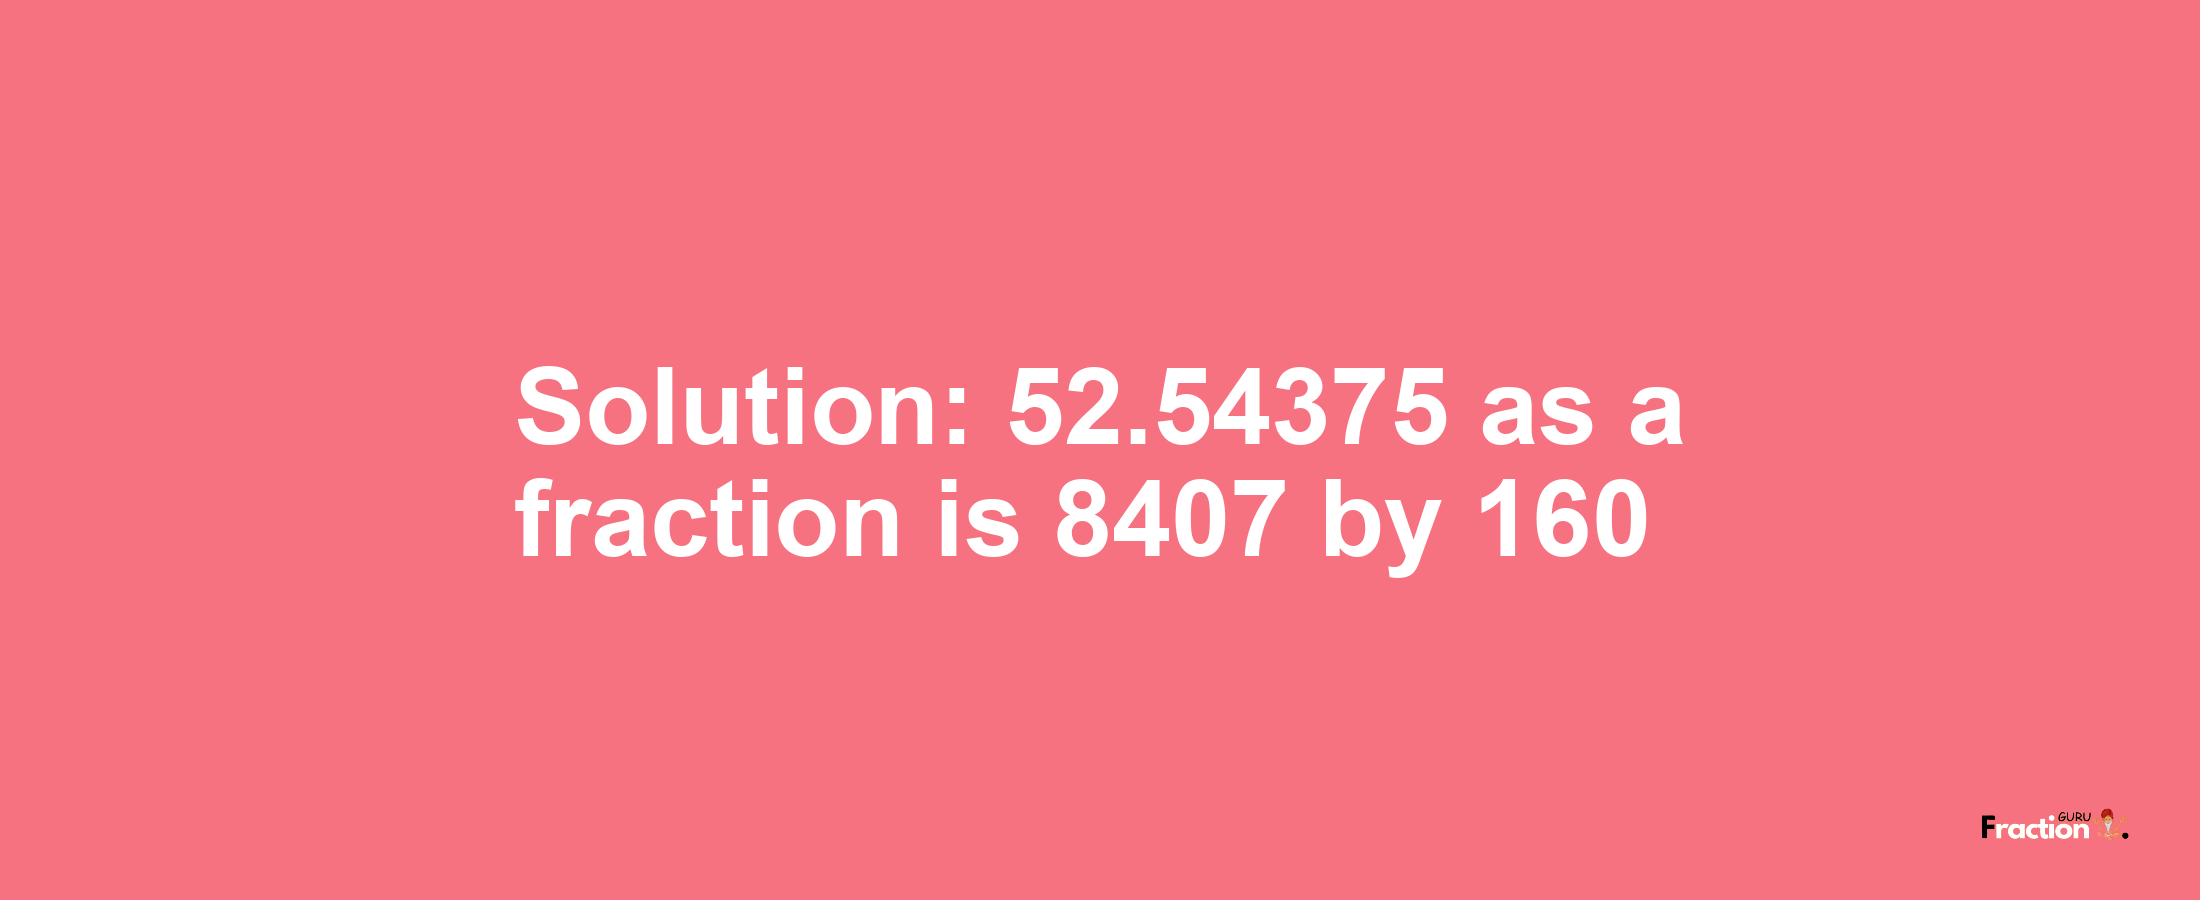 Solution:52.54375 as a fraction is 8407/160